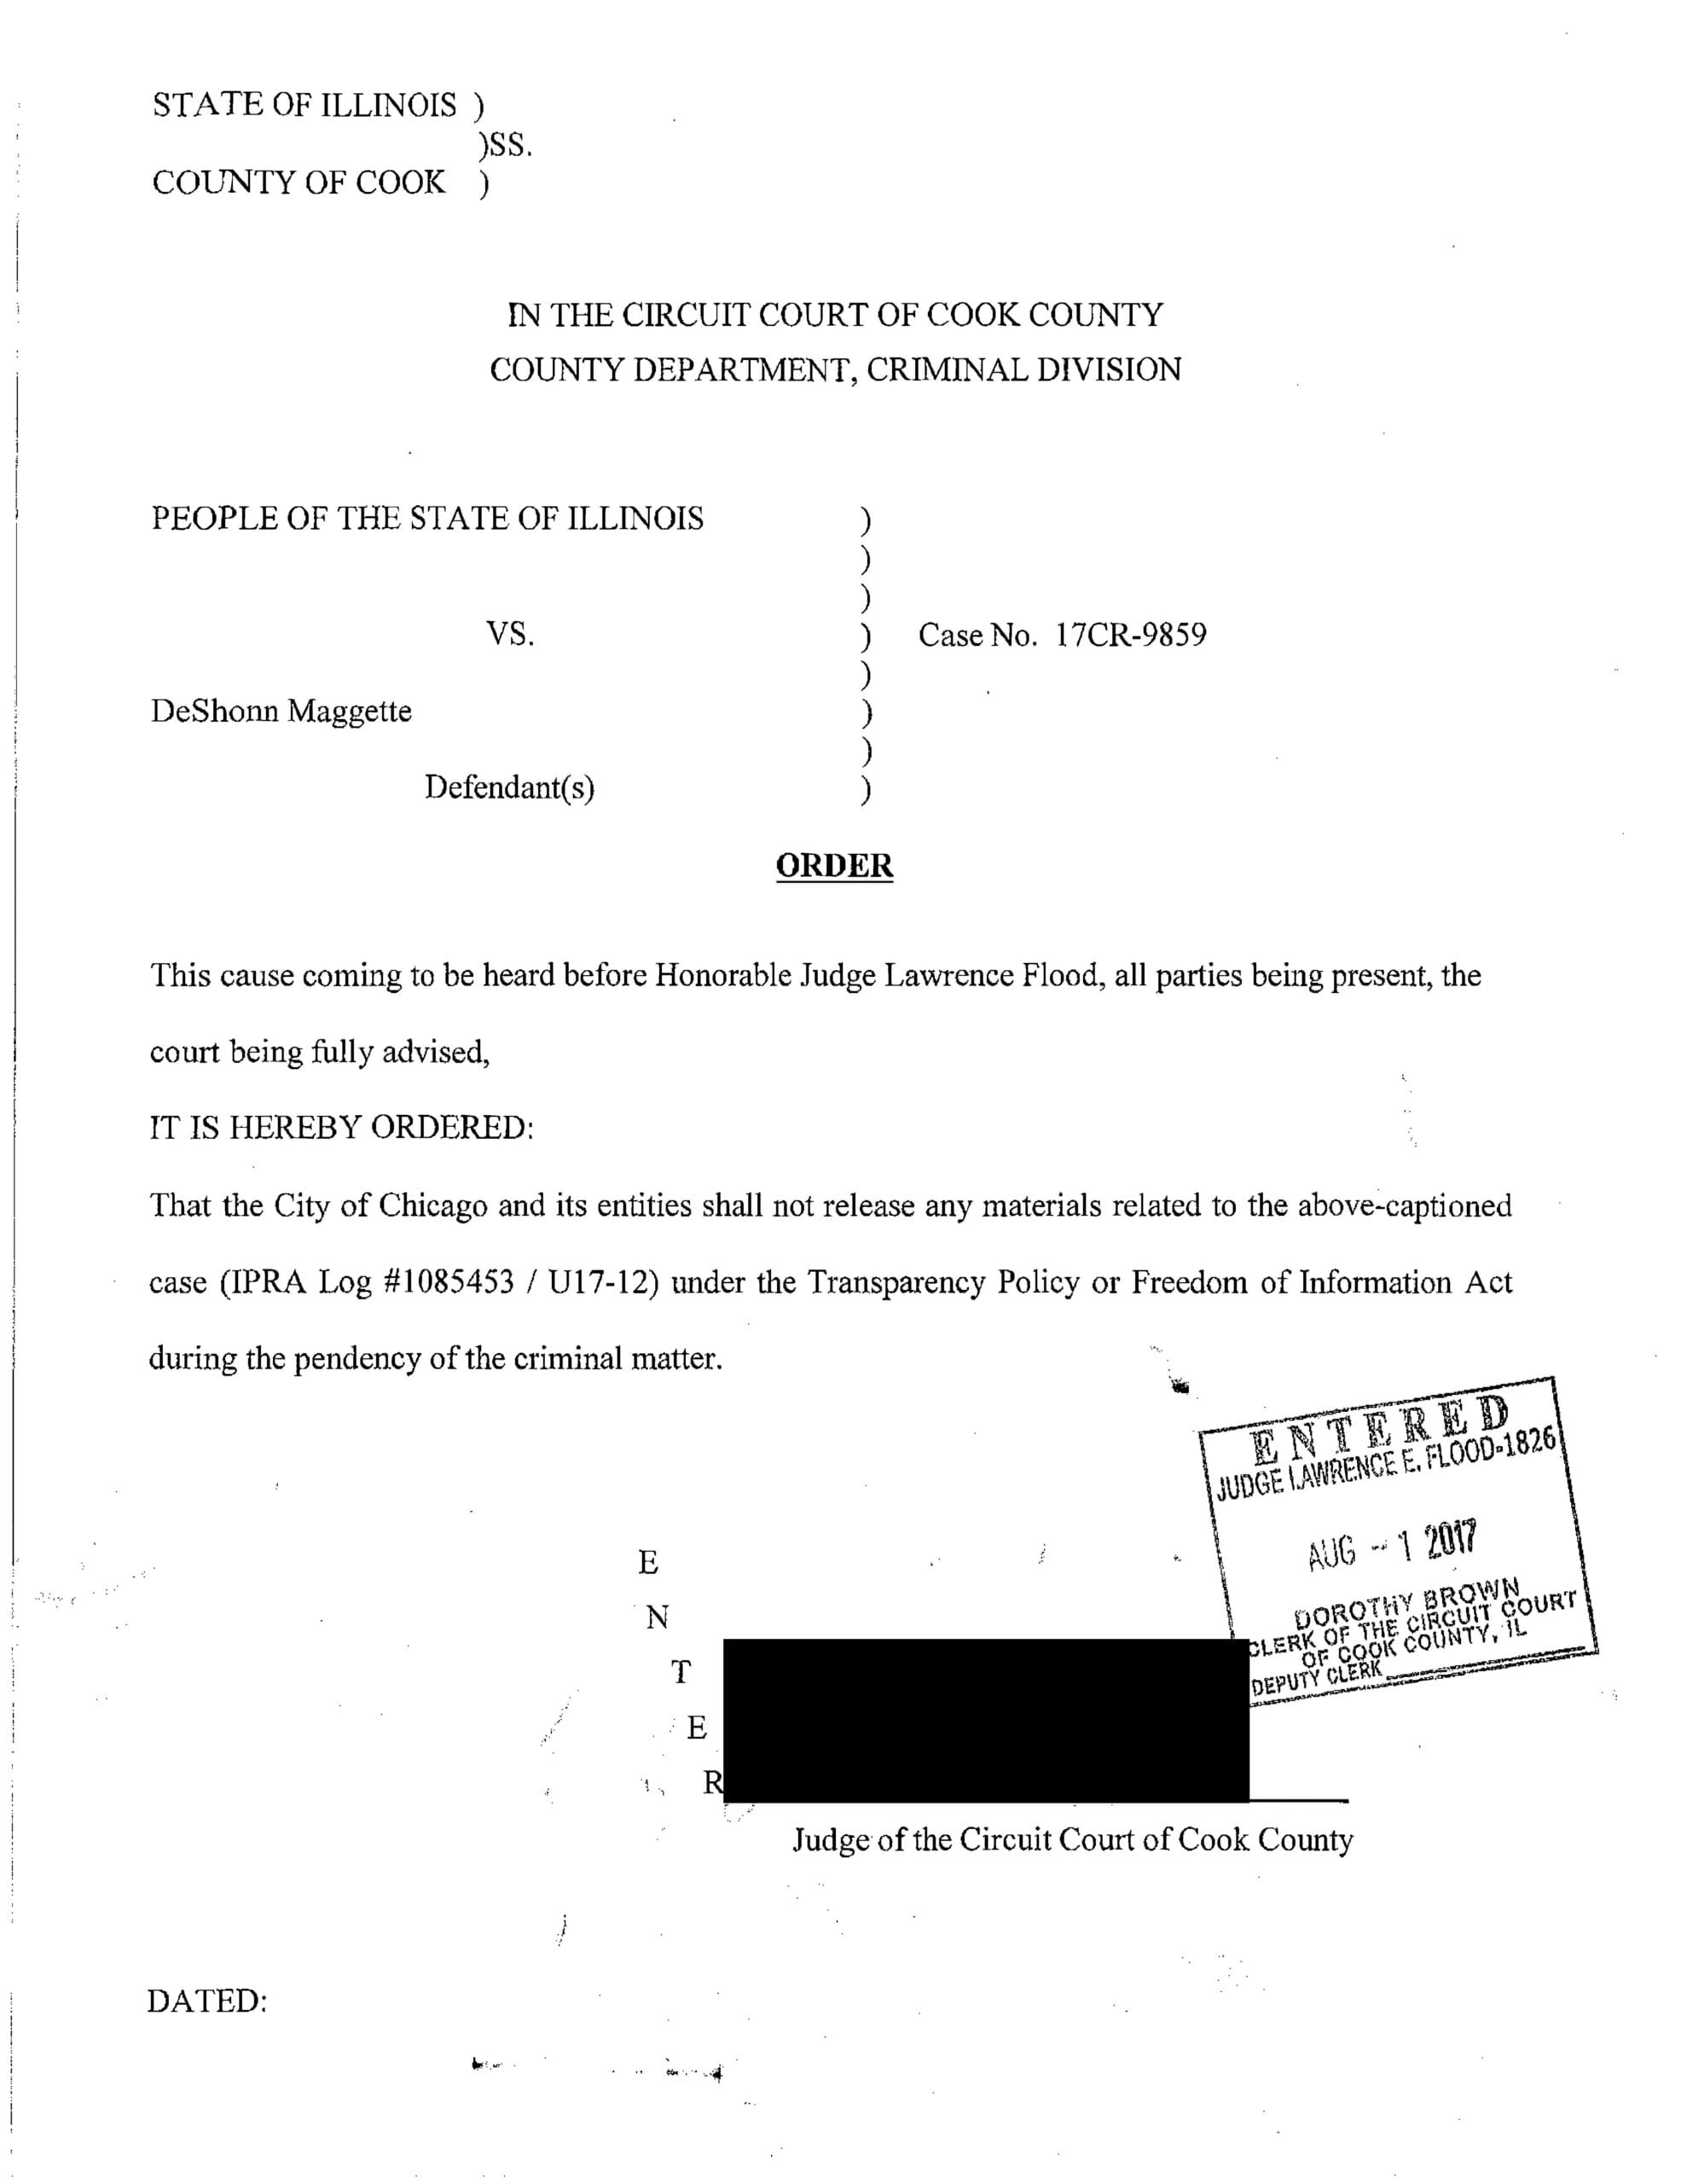 Court Order Redacated scaled